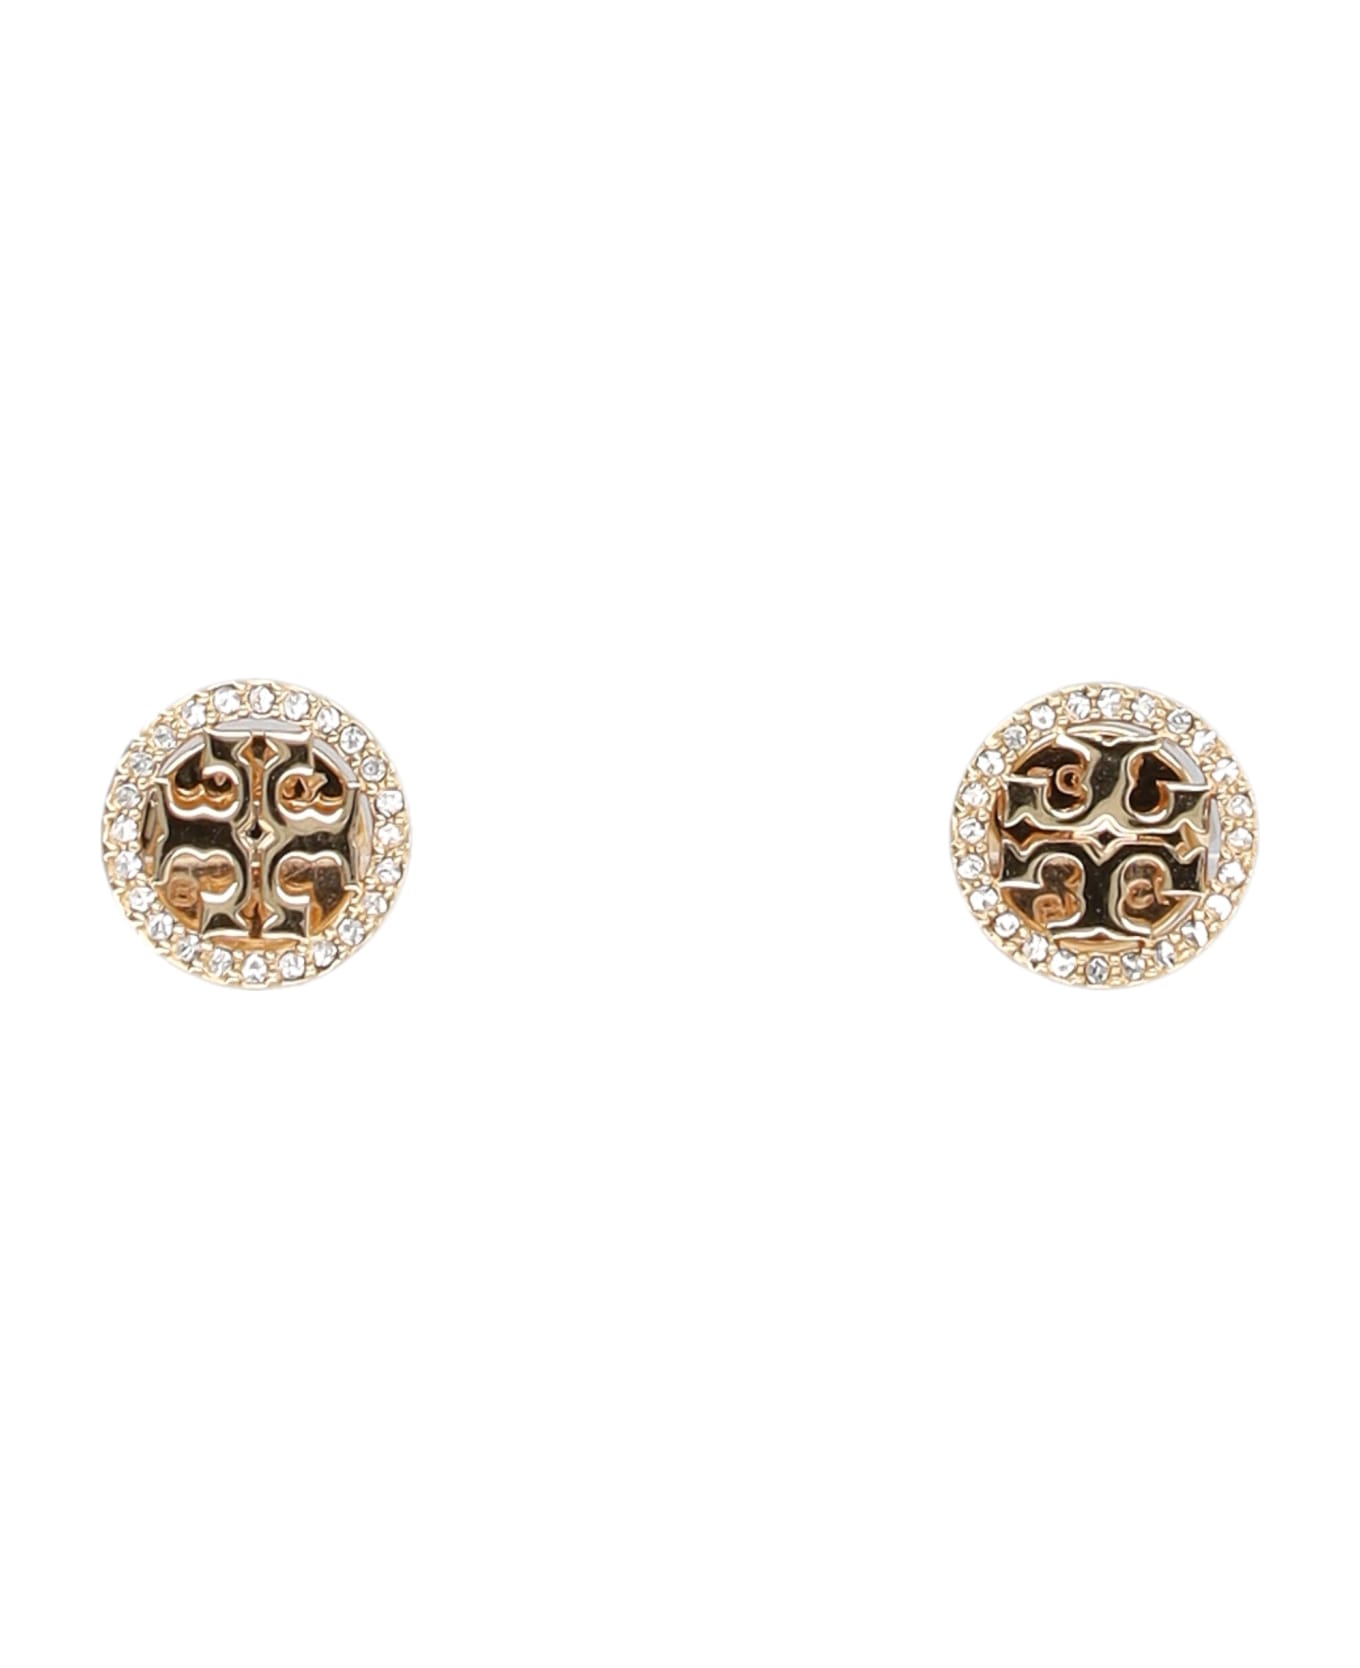 Tory Burch Miller Pave Stud Earring - Tory Gold / Crystal イヤリング